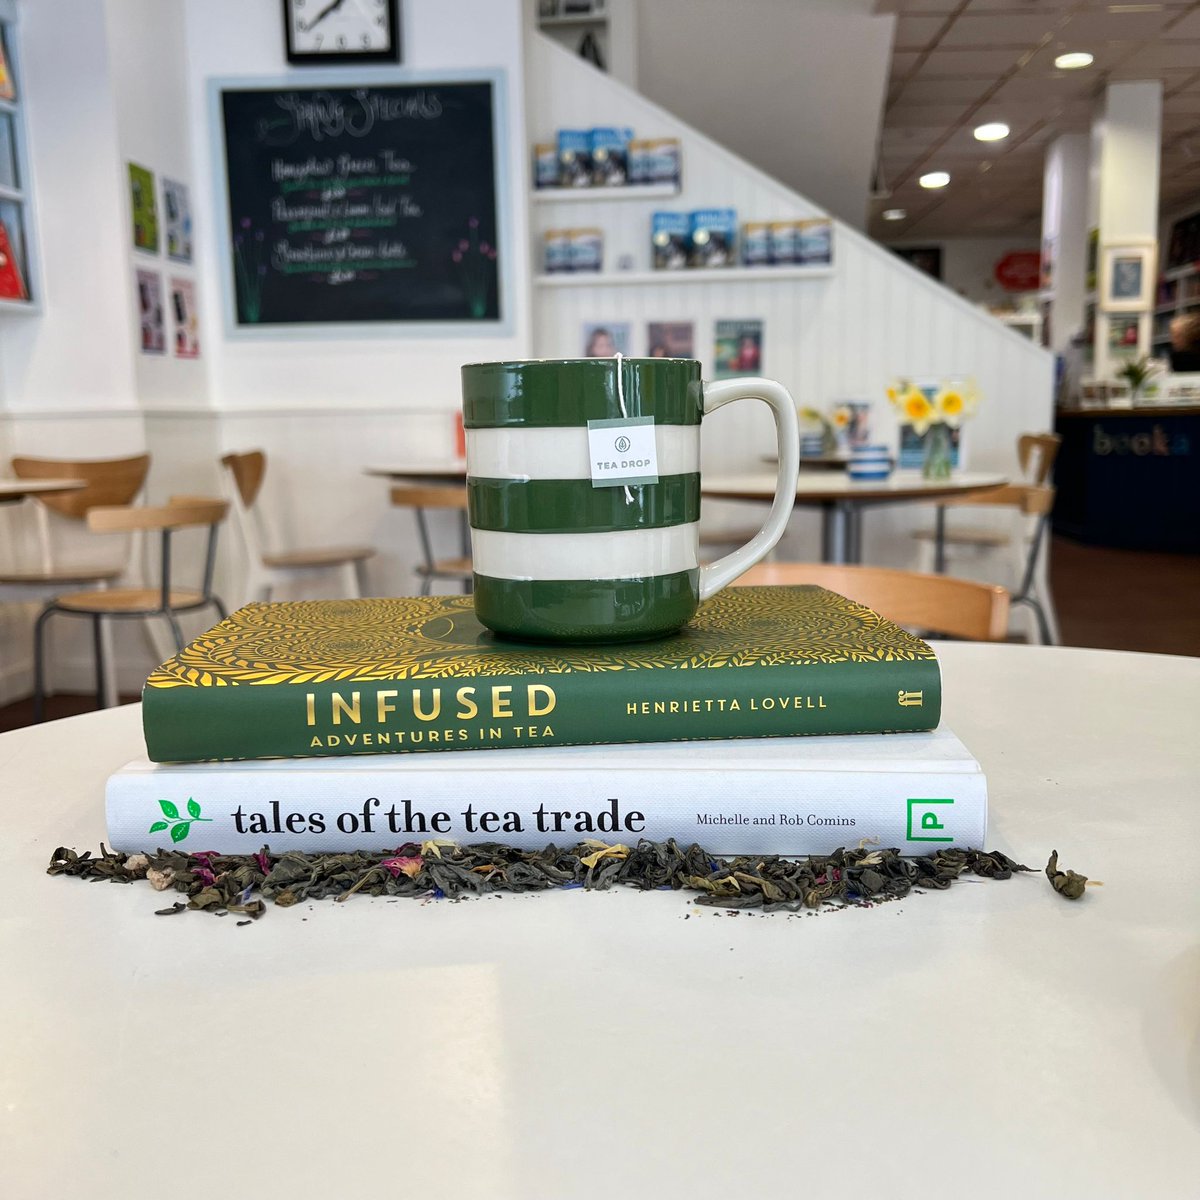 Happy National Tea Day! 🫖 Pop into the Café at Booka Oswestry and indulge in one of our teas to celebrate. Open 11am-3pm. #bookacafe #cafe #barista #Nationalteaday